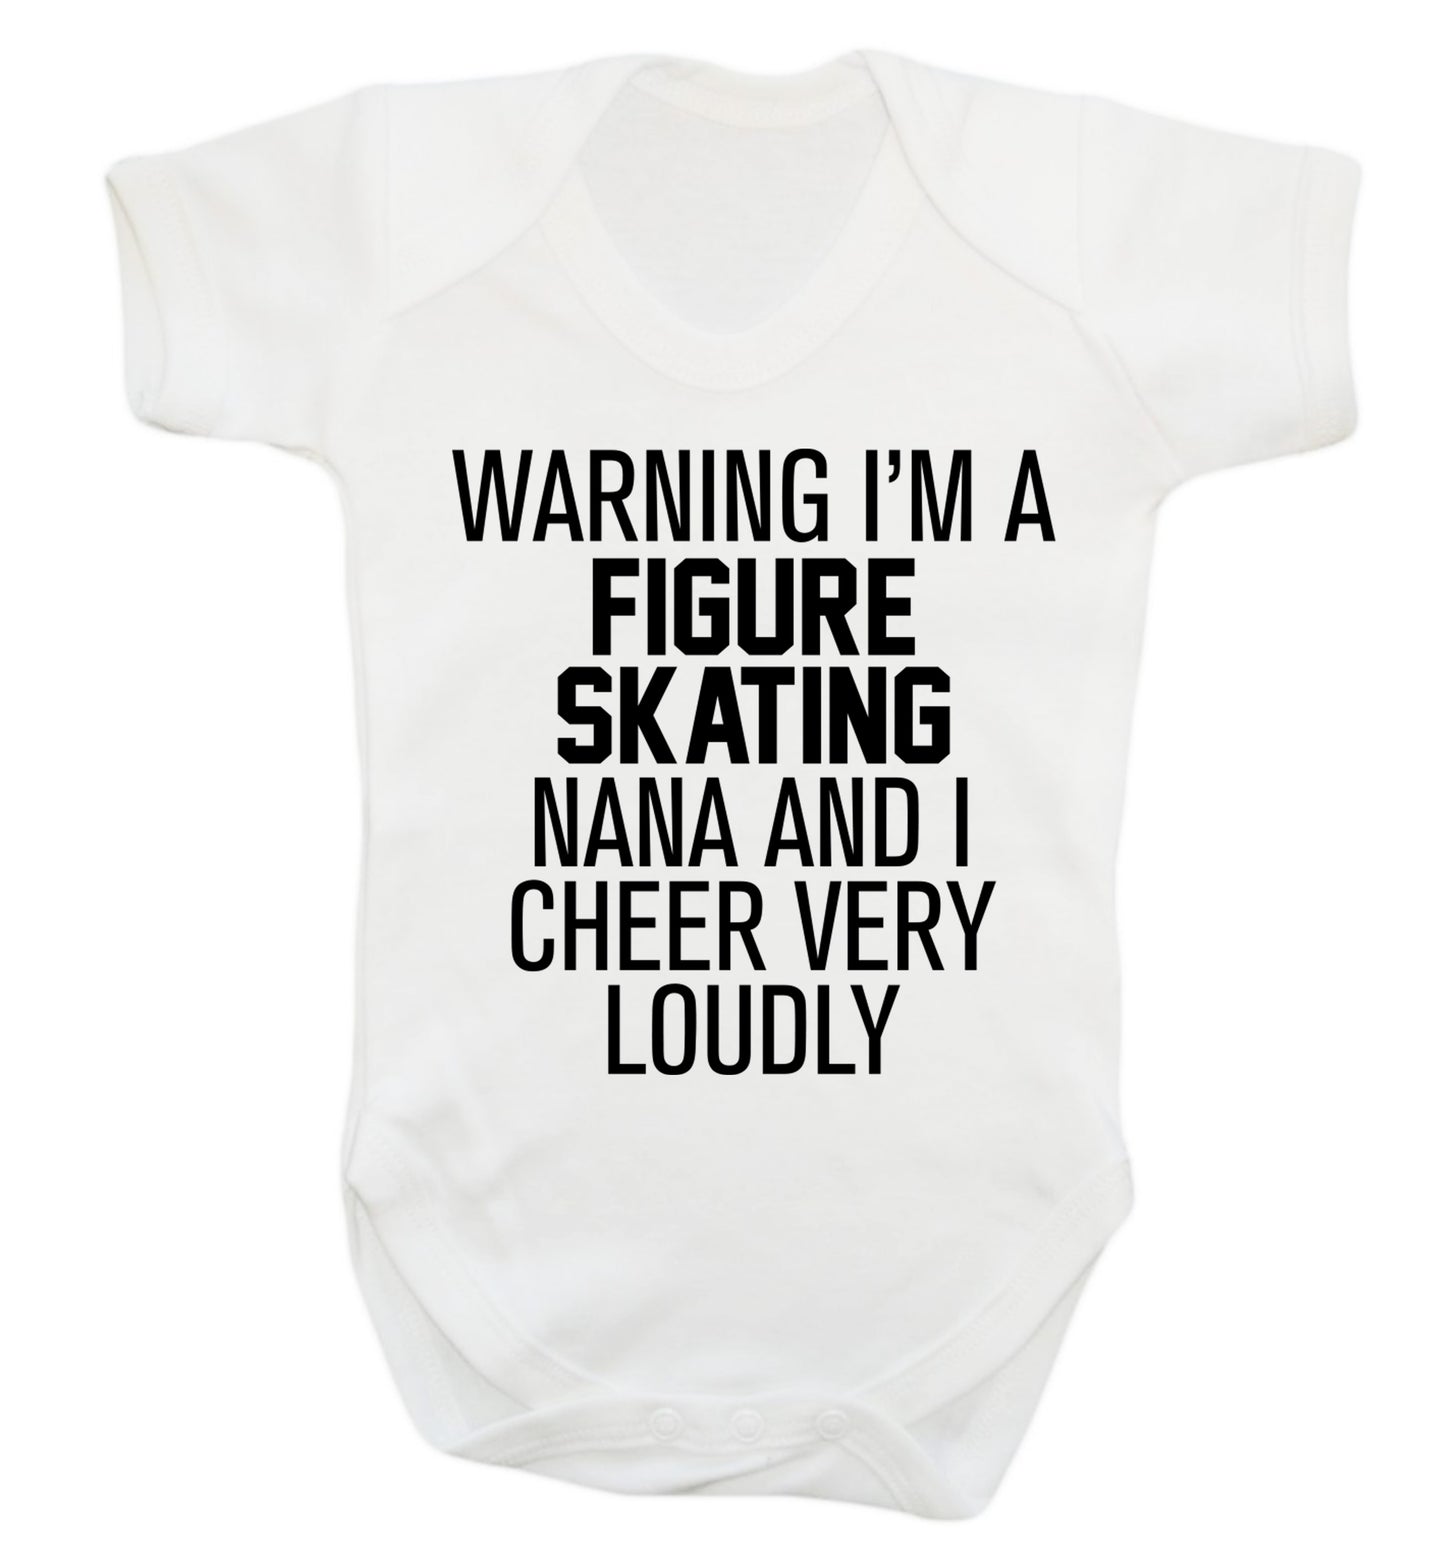 Warning I'm a figure skating nana and I cheer very loudly Baby Vest white 18-24 months